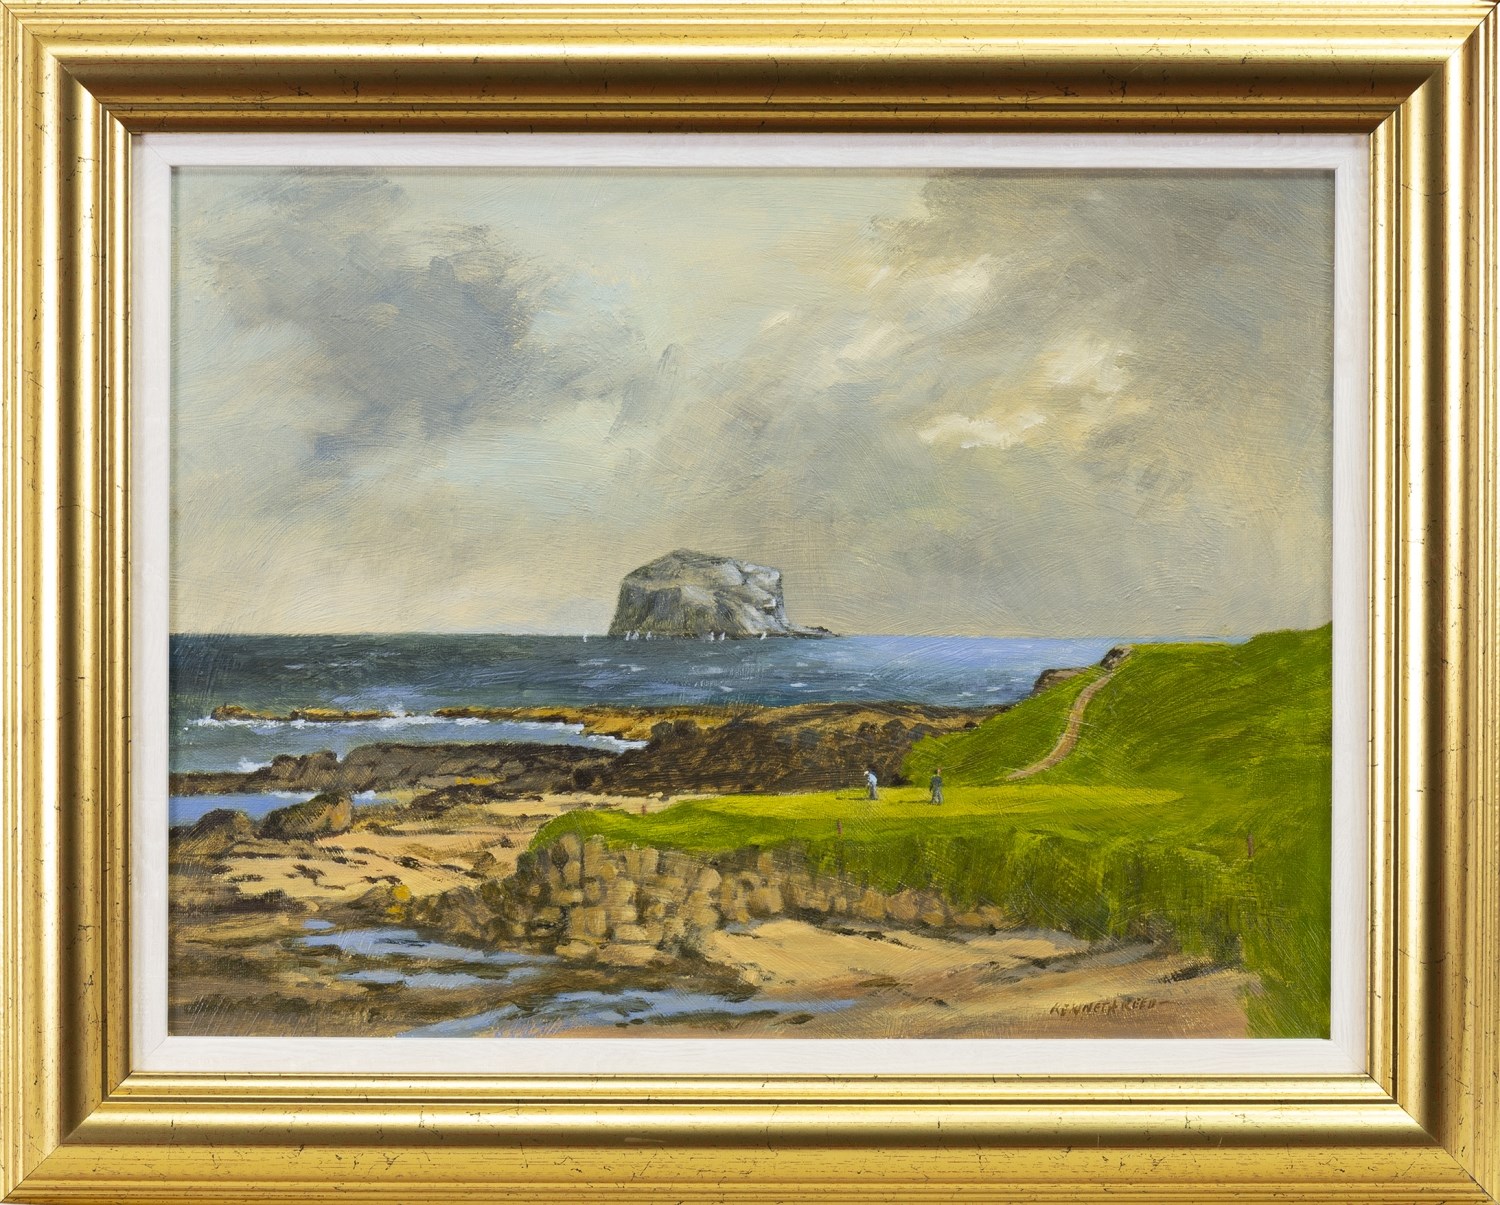 'SEA HOLE' (13TH HOLE), GLEN COURSE, NORTH BERWICK, AN OIL ON BOARD BY KENNETH REED